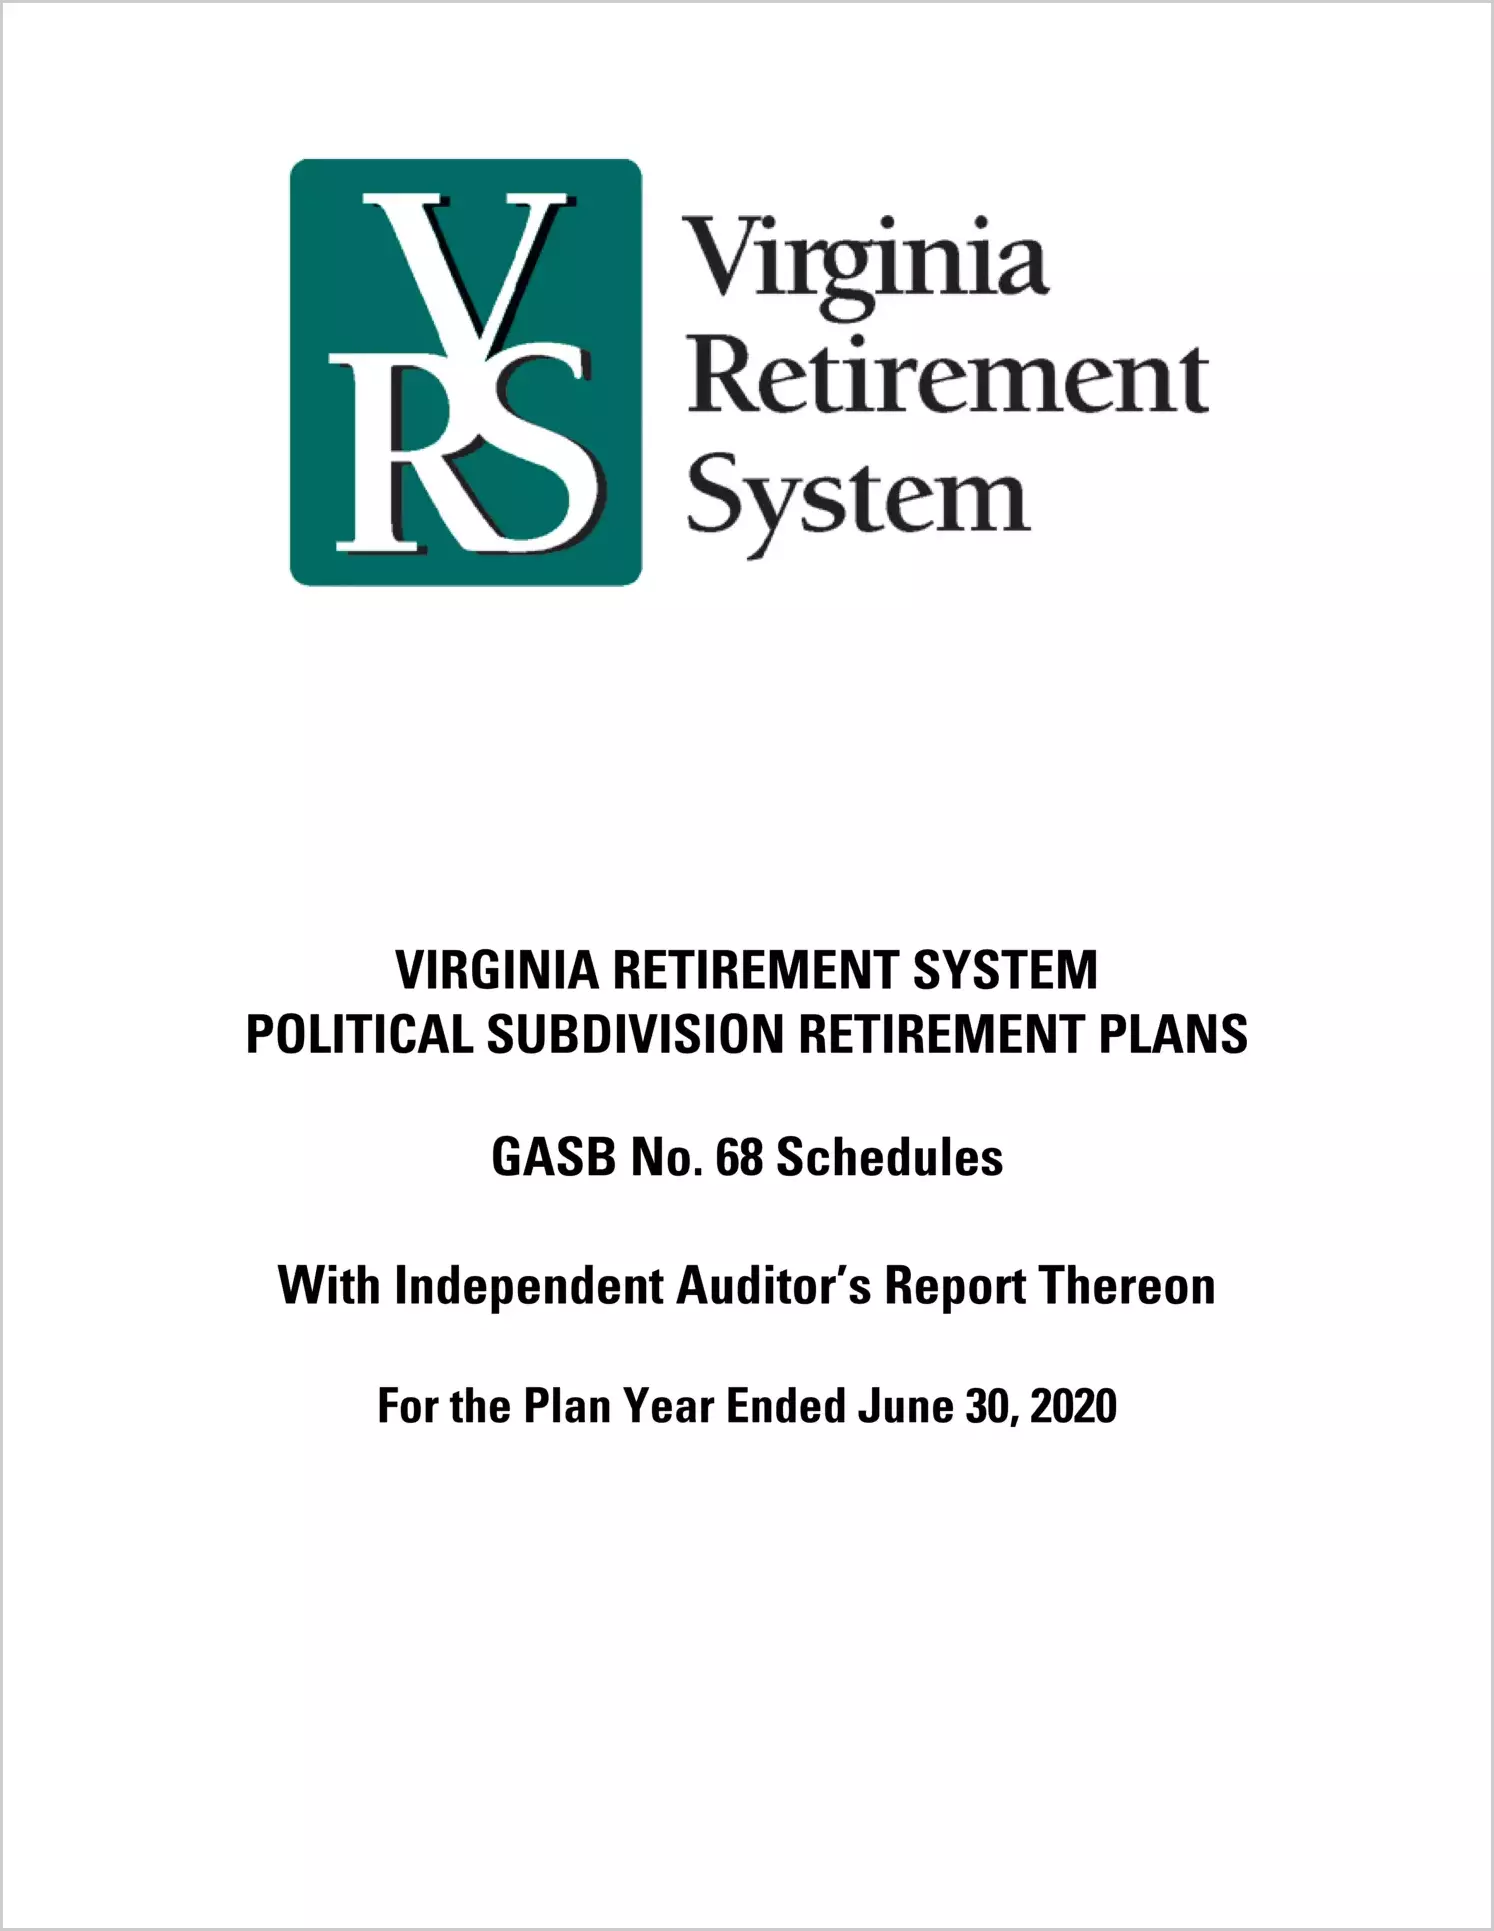 GASB 68 Schedule - Virginia Retirement System Political Subdivision Retirement Plans for the year ended June 30, 2020